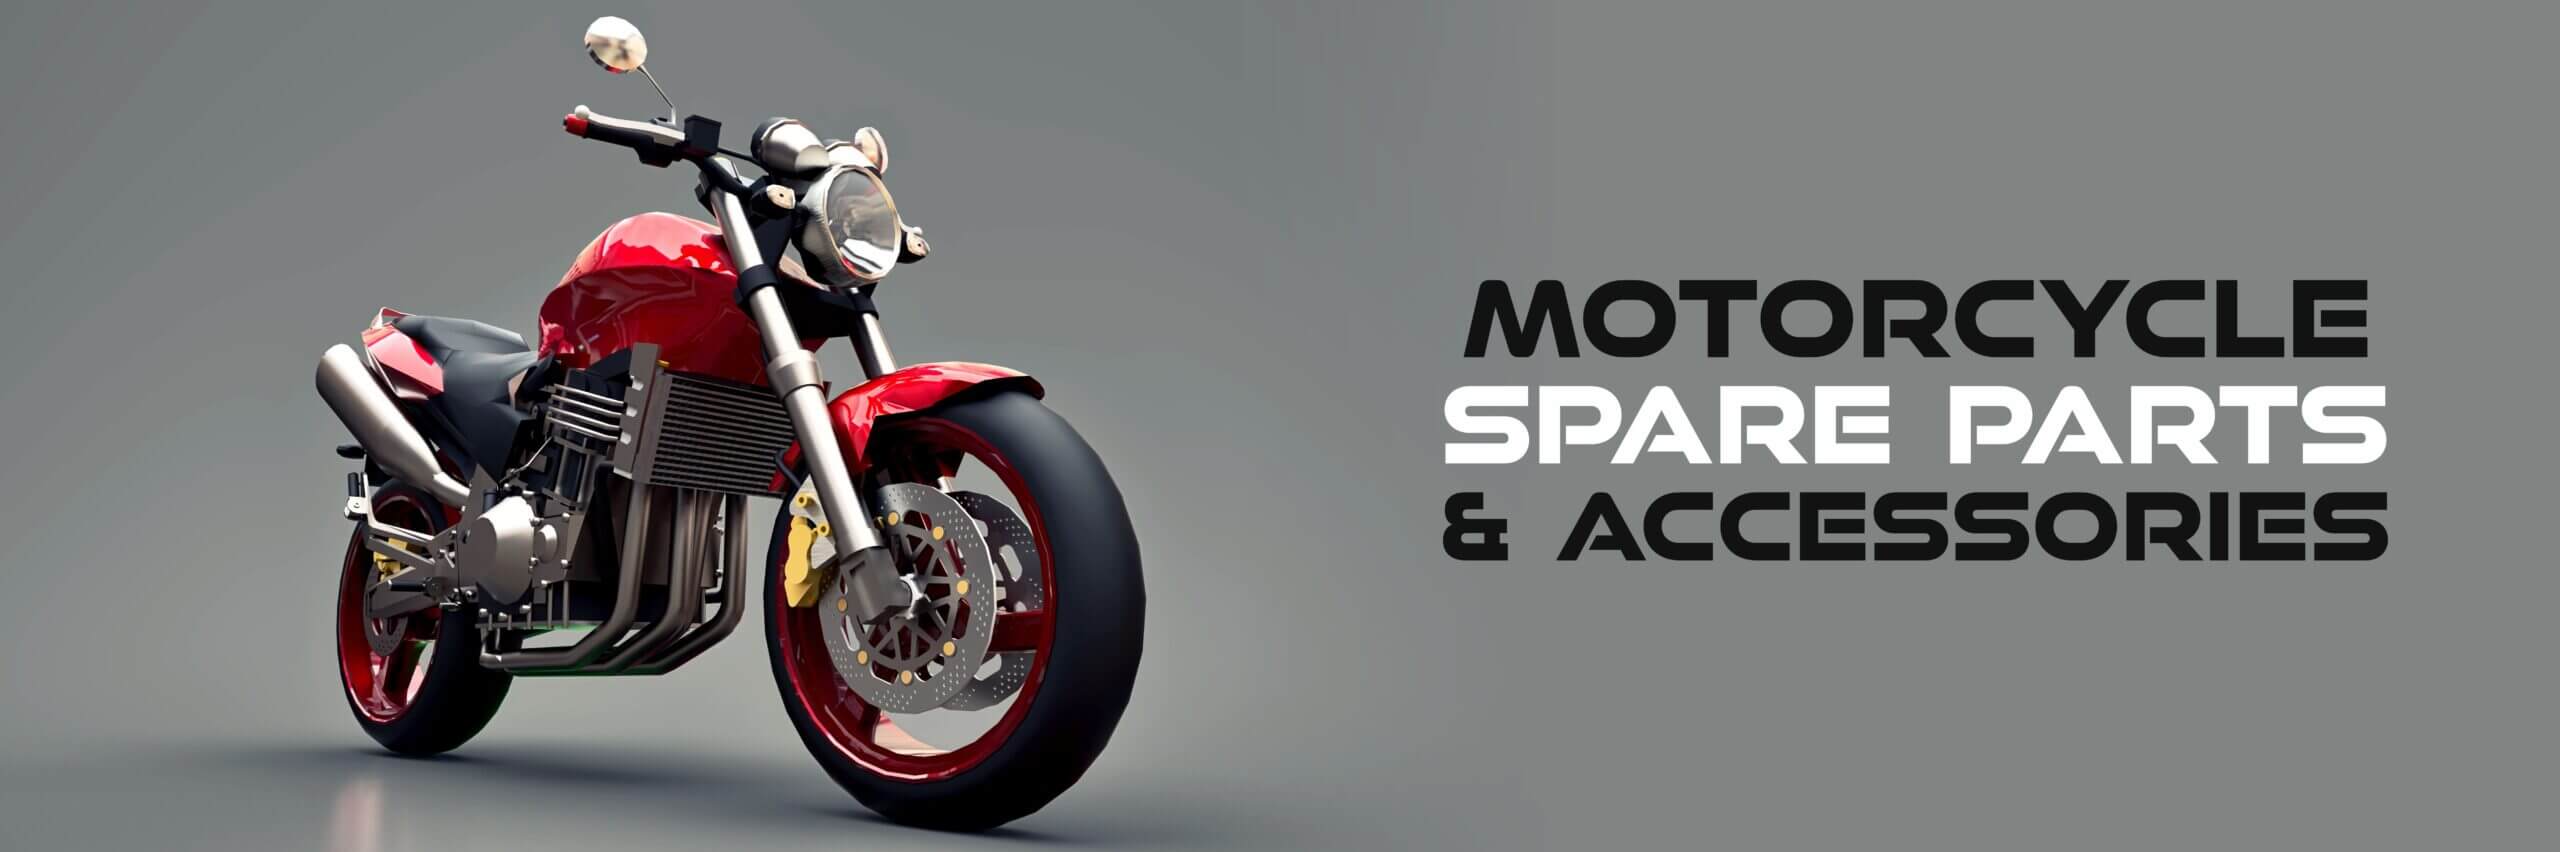 Motocycle Spare Parts Banner Image